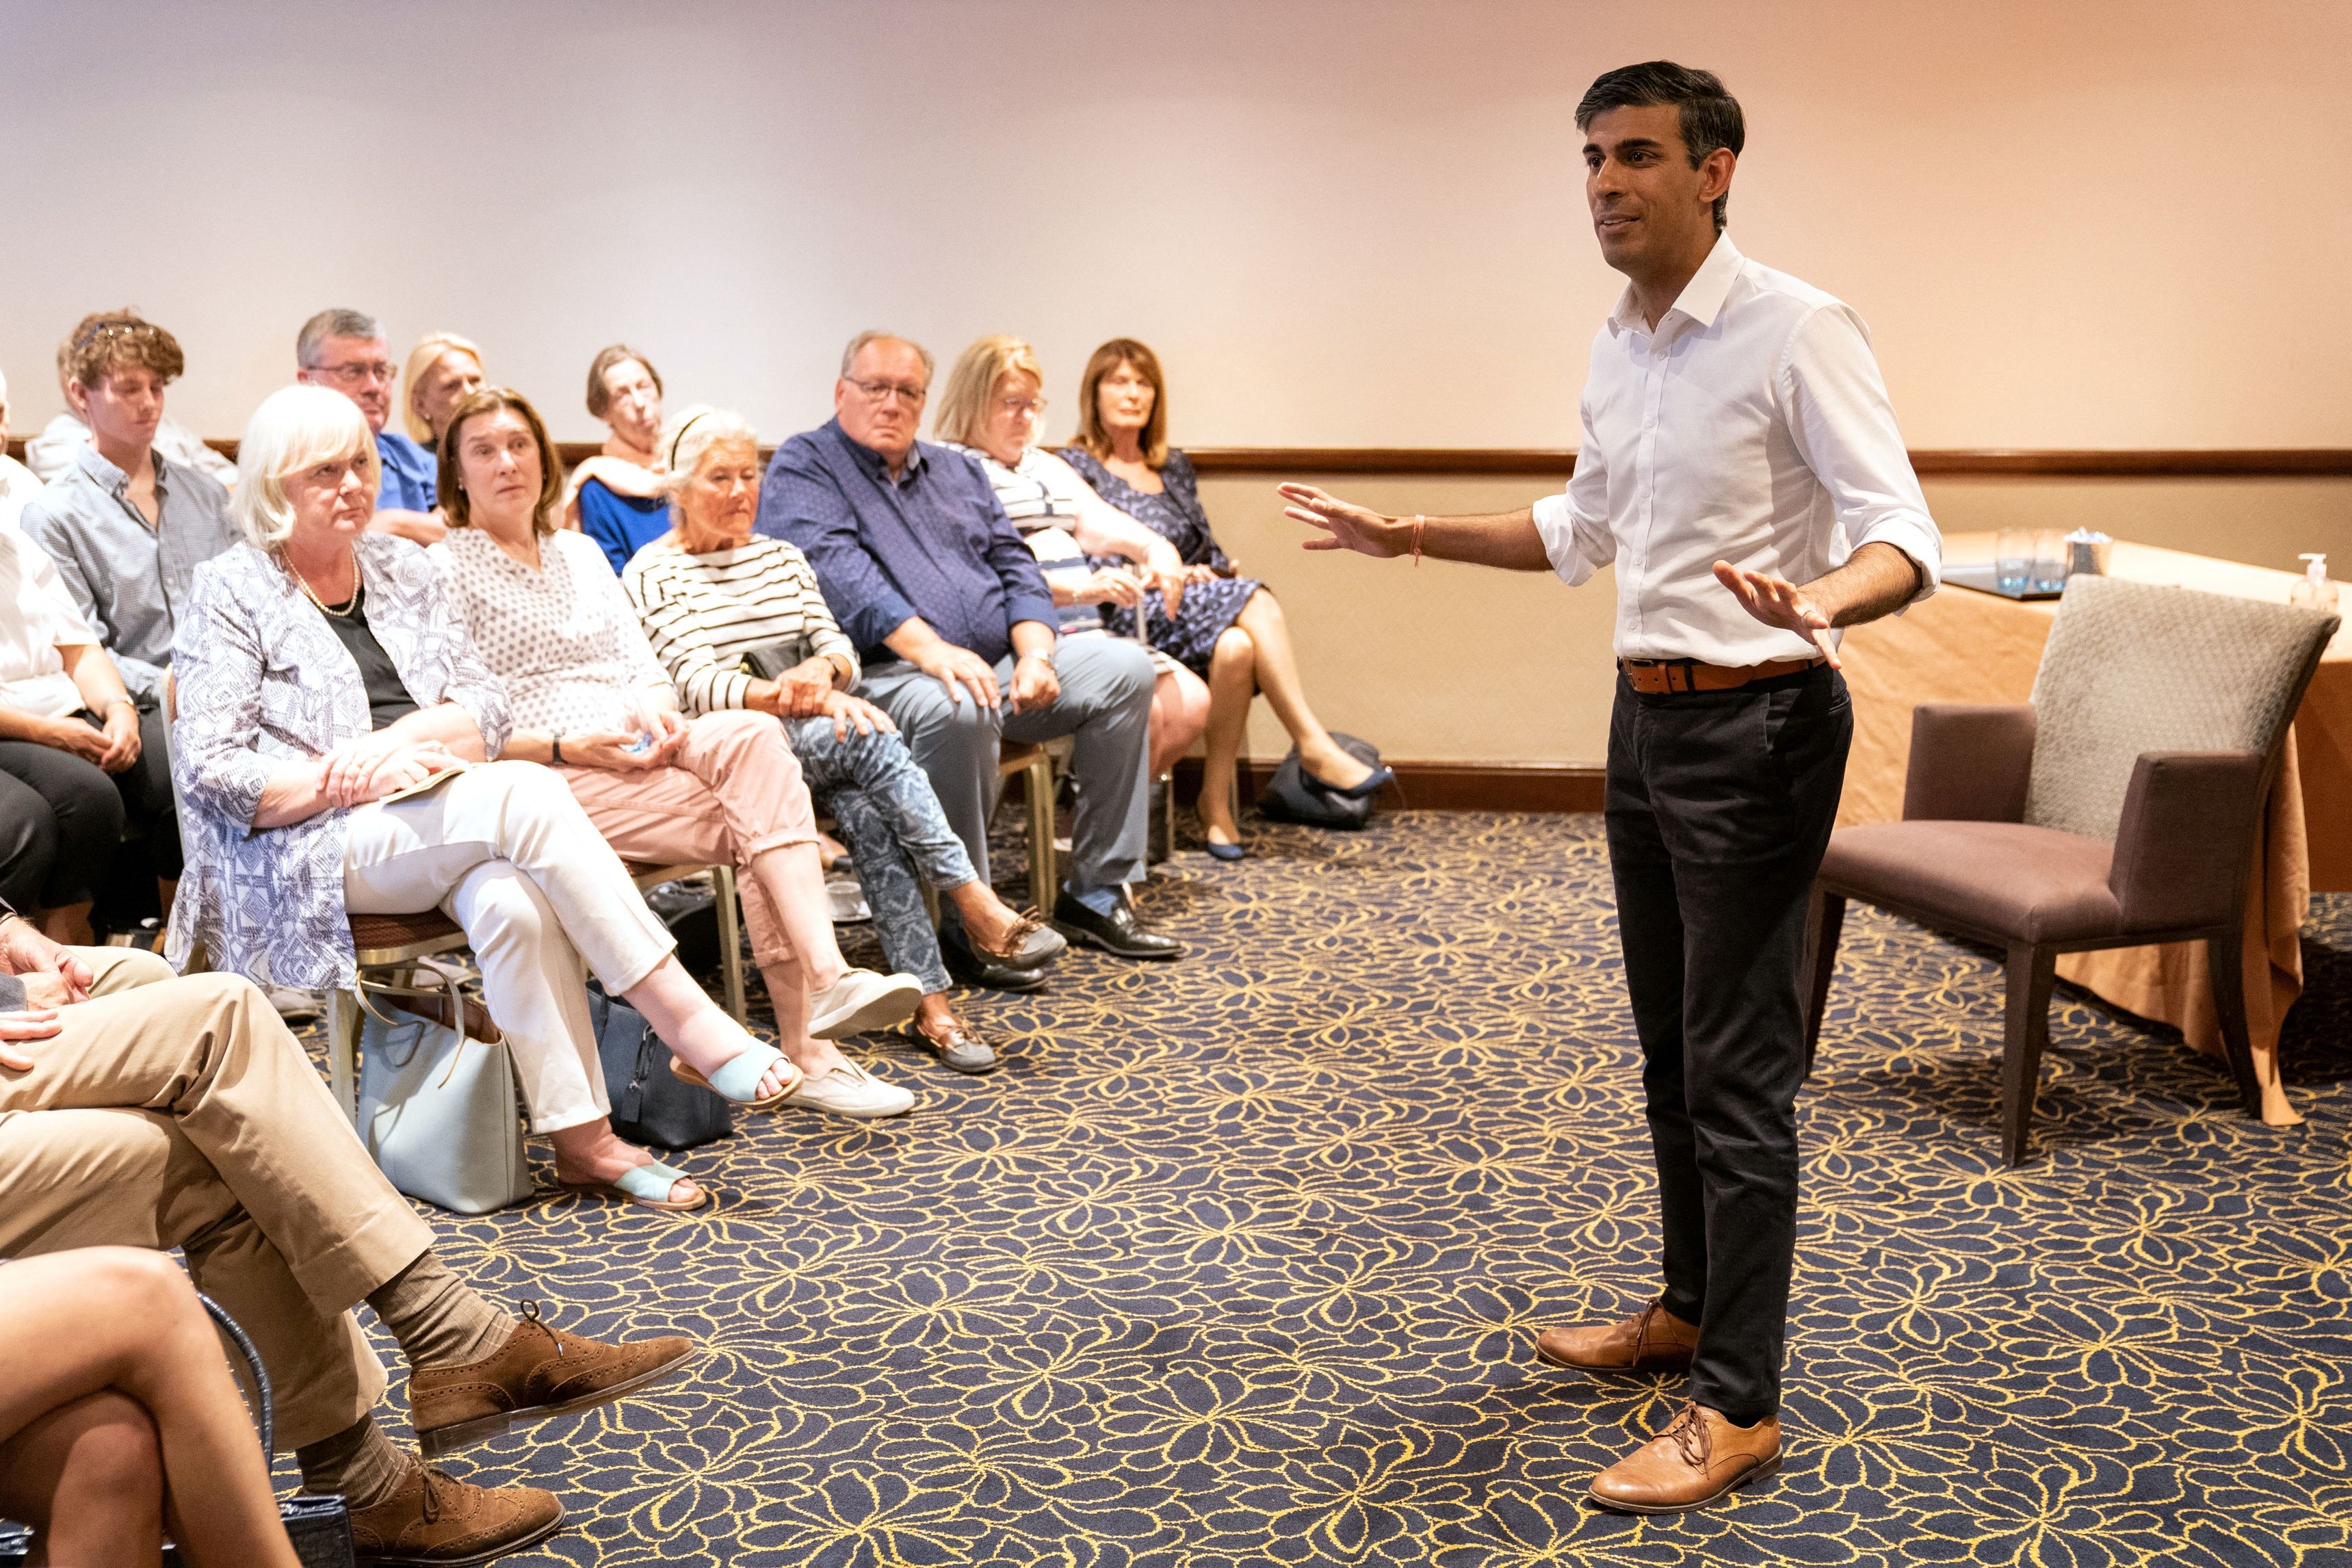 Rishi Sunak delivers a speech during a campaign event in Newmarket